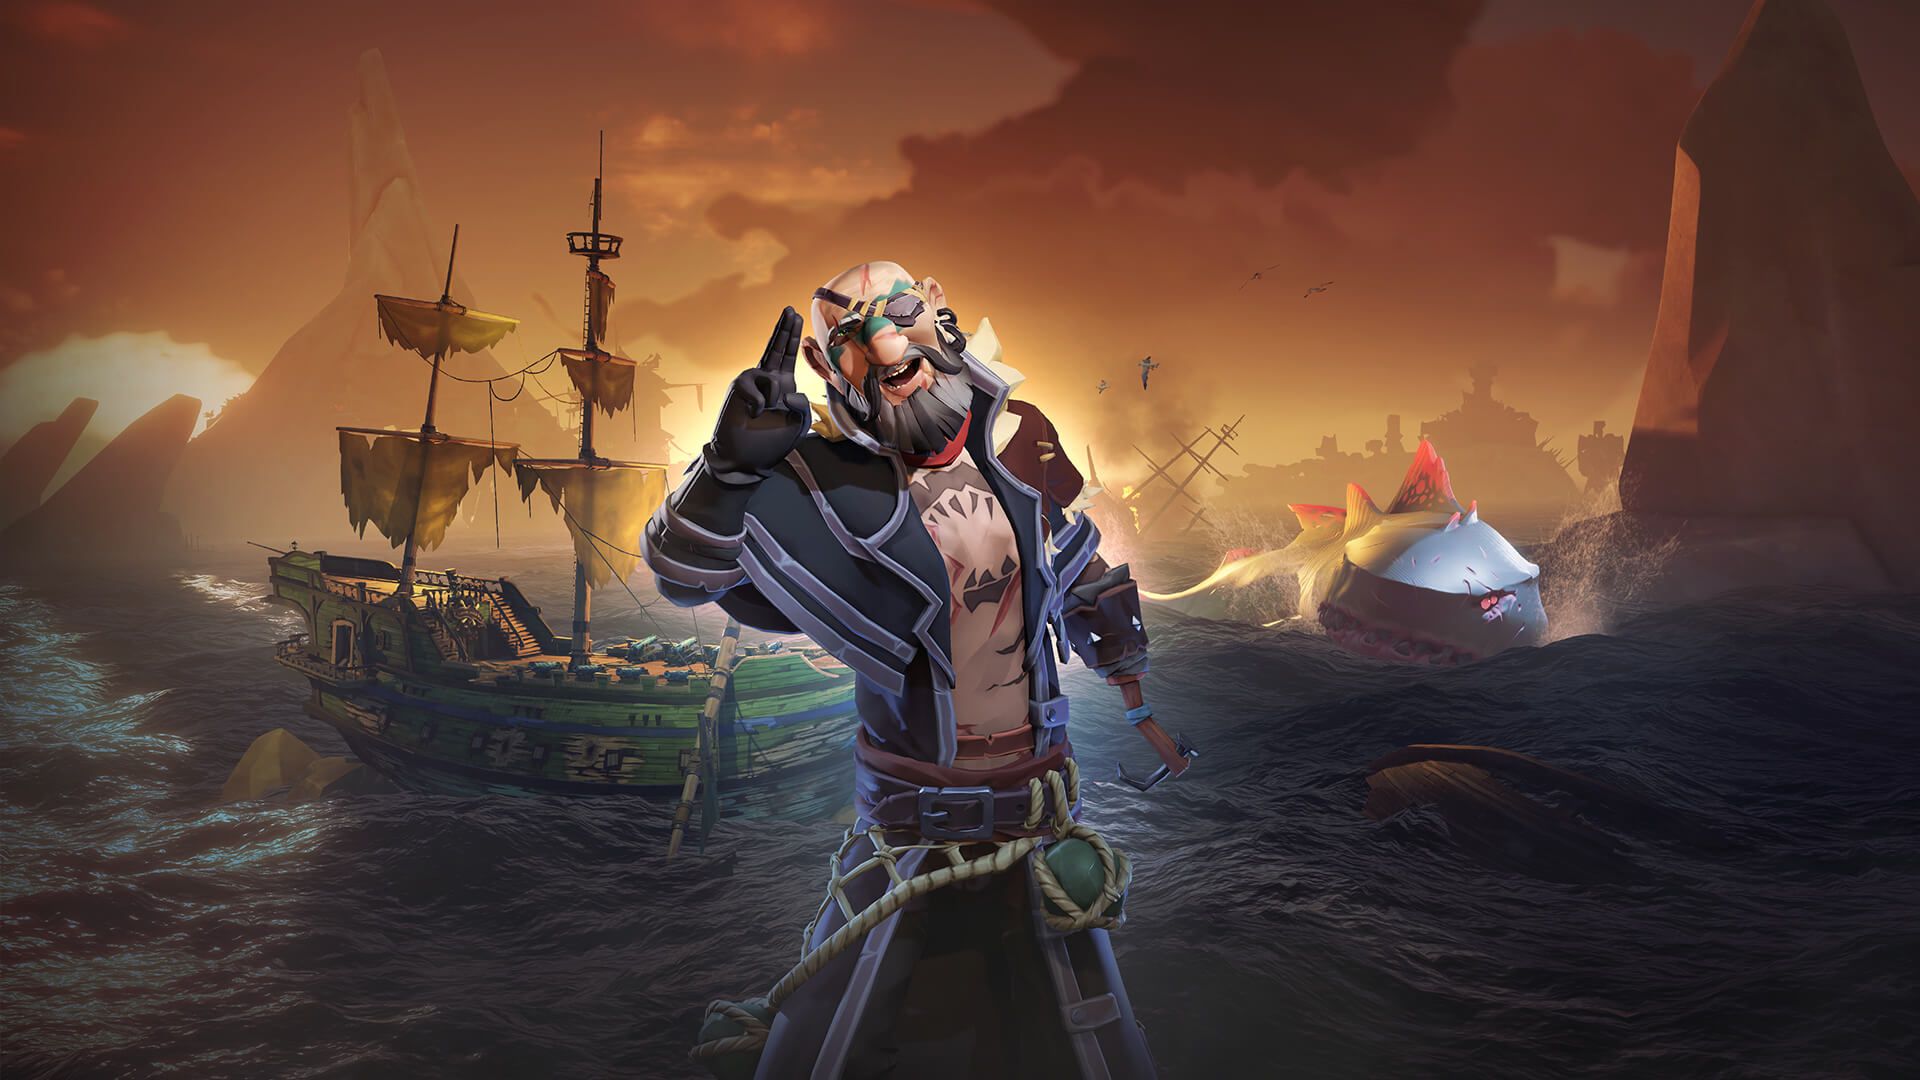 Buy Xbox One X, Get Sea of Thieves for a Limited Time - Xbox Wire